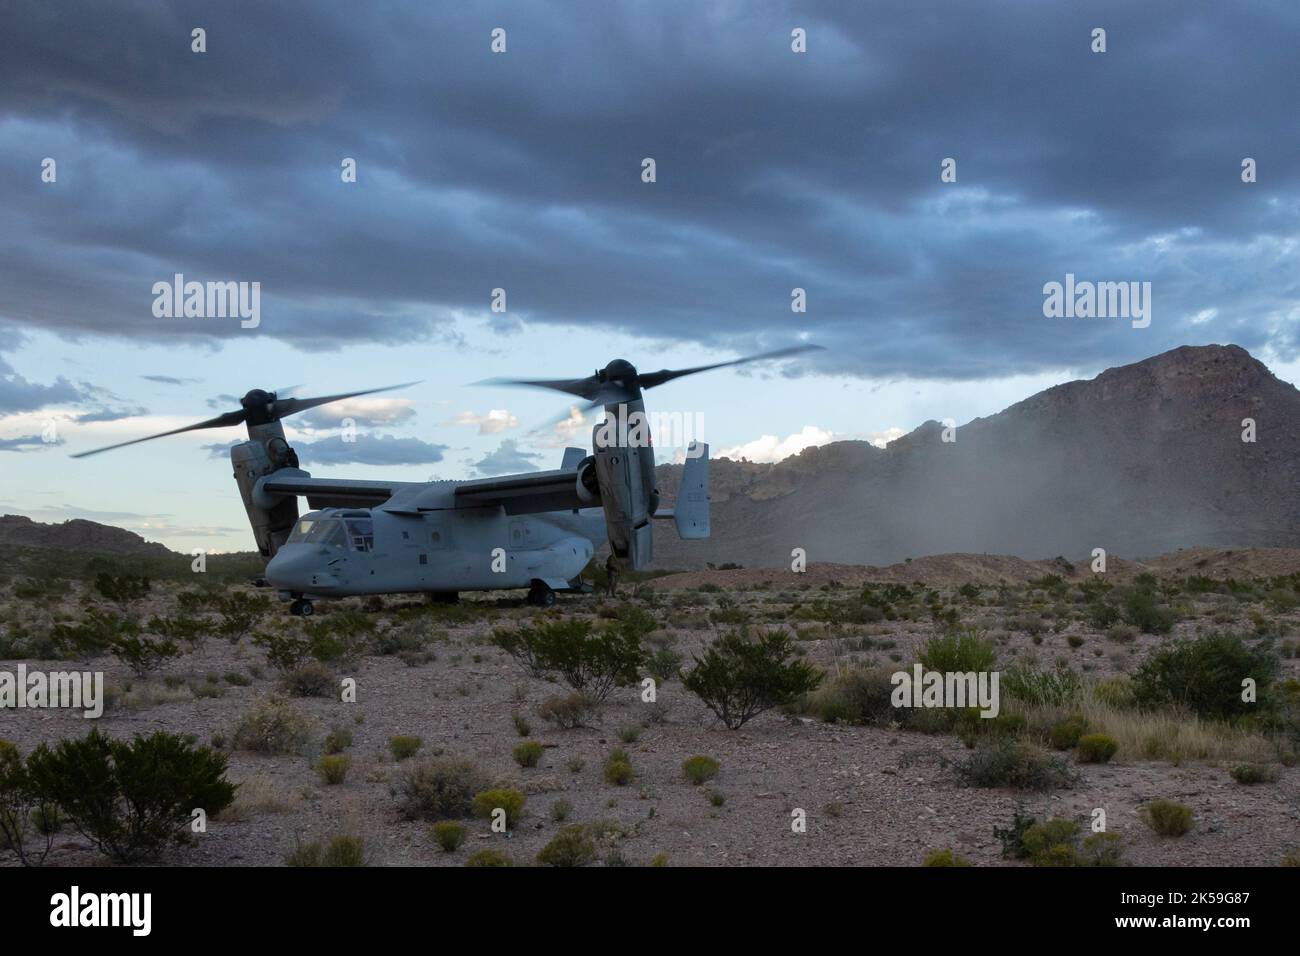 A U.S. Marine Corps MV-22B Osprey assigned to Marine Aviation Weapons and Tactics Squadron One (MAWTS-1) lands during Weapons and Tactics Instructor (WTI) course 1-23 near Playas, New Mexico, Sept. 30, 2022. WTI is a seven-week training event hosted by MAWTS-1, providing standardized advanced tactical training and certification of unit instructor qualifications to support Marine aviation training and readiness, and assists in developing and employing aviation weapons and tactics. (U.S. Marine Corps photo by Lance Cpl. Anakin Smith) Stock Photo